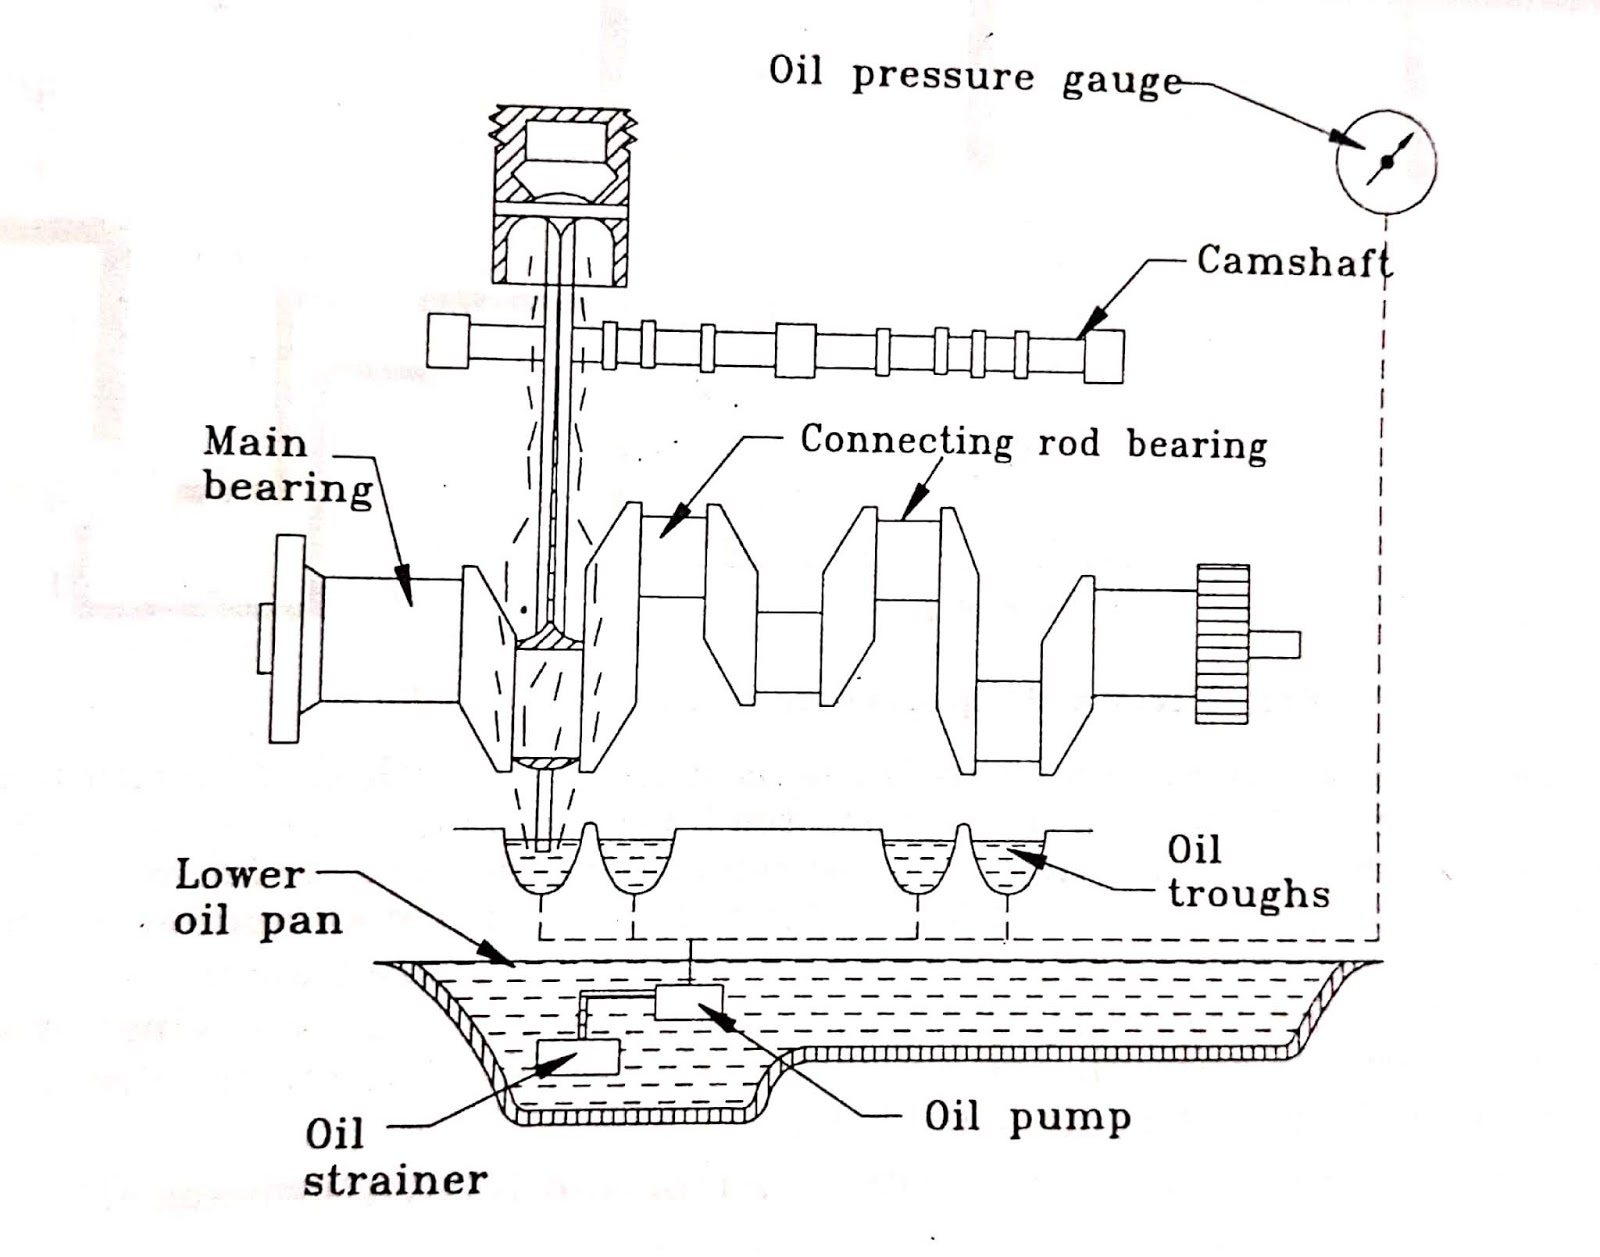 All About Mechanical Engineering : Lubricating Systems